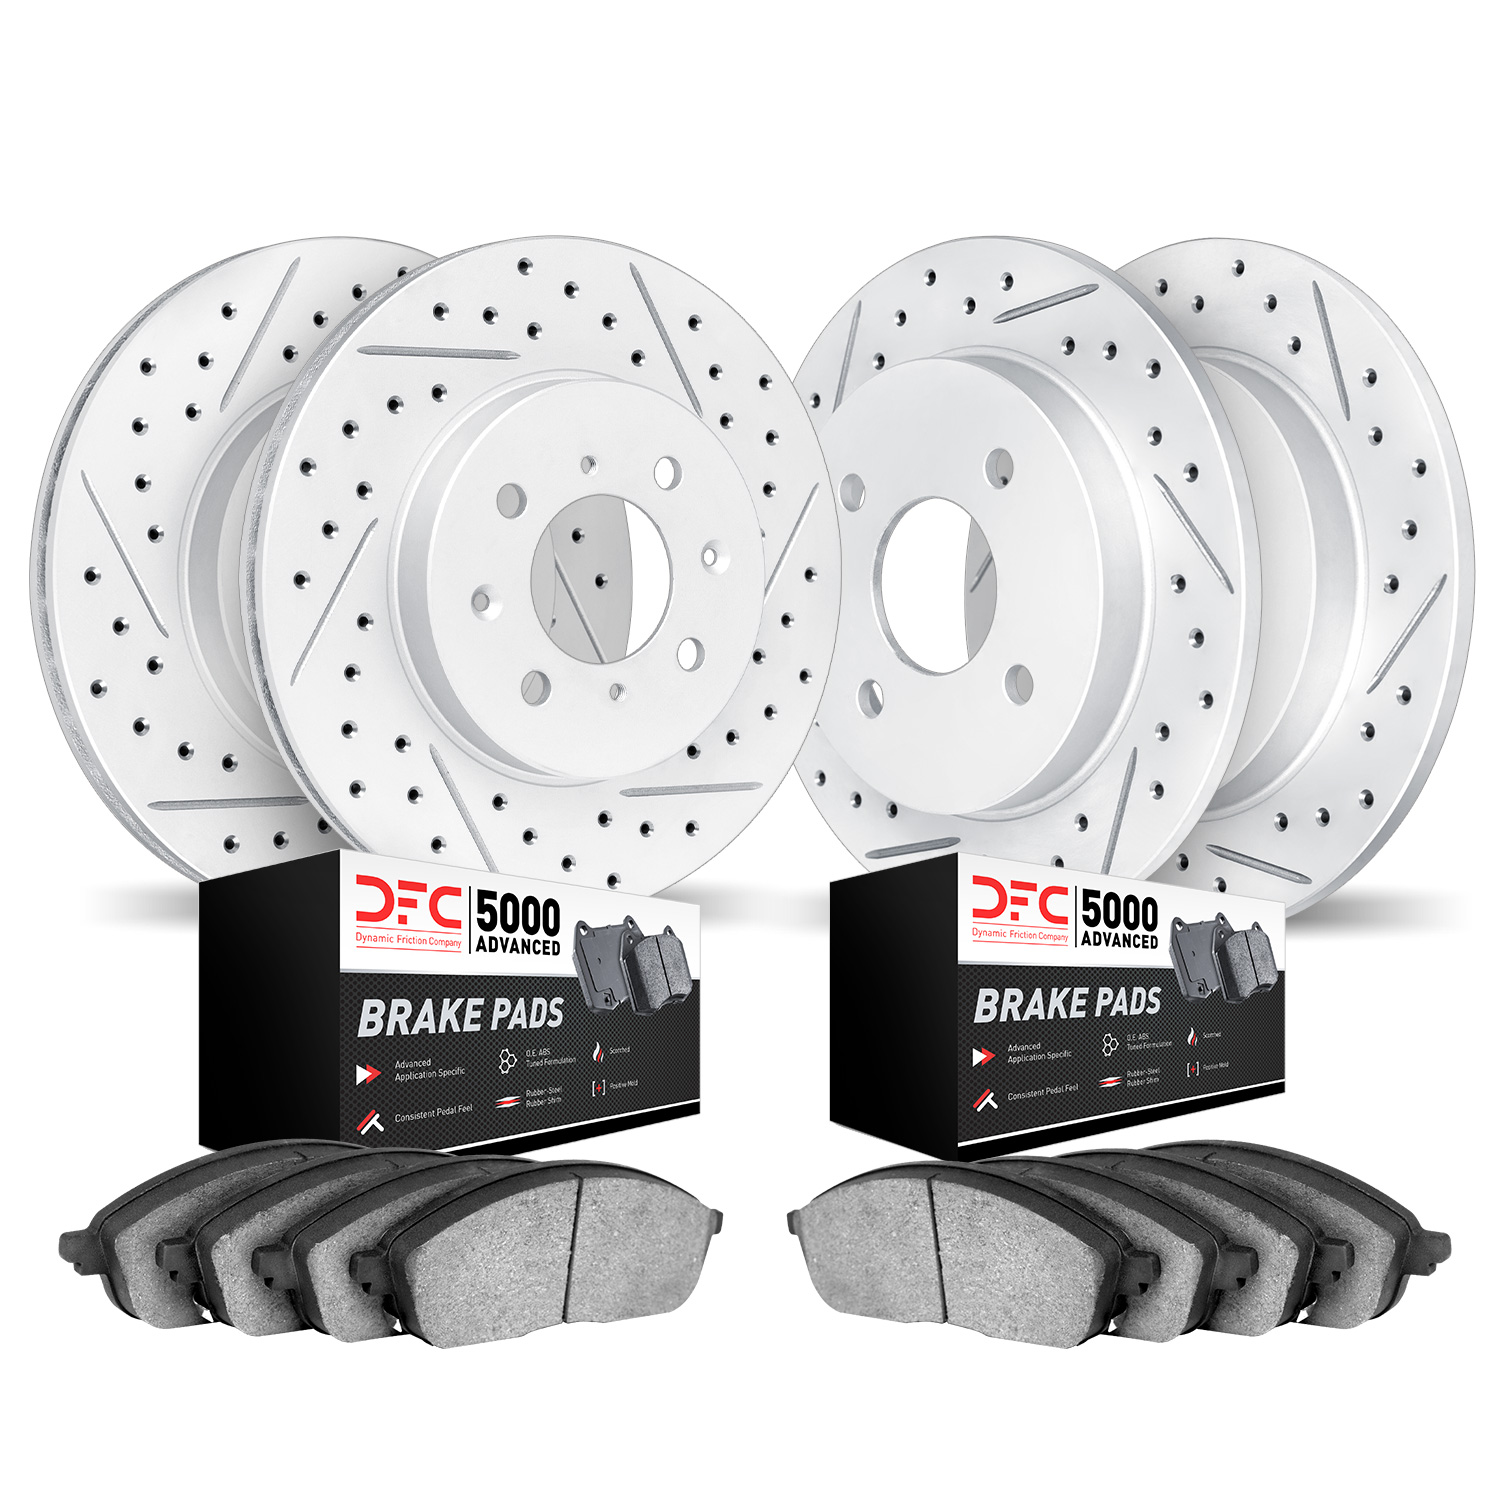 2504-01000 Geoperformance Drilled/Slotted Rotors w/5000 Advanced Brake Pads Kit, 2004-2007 Multiple Makes/Models, Position: Fron